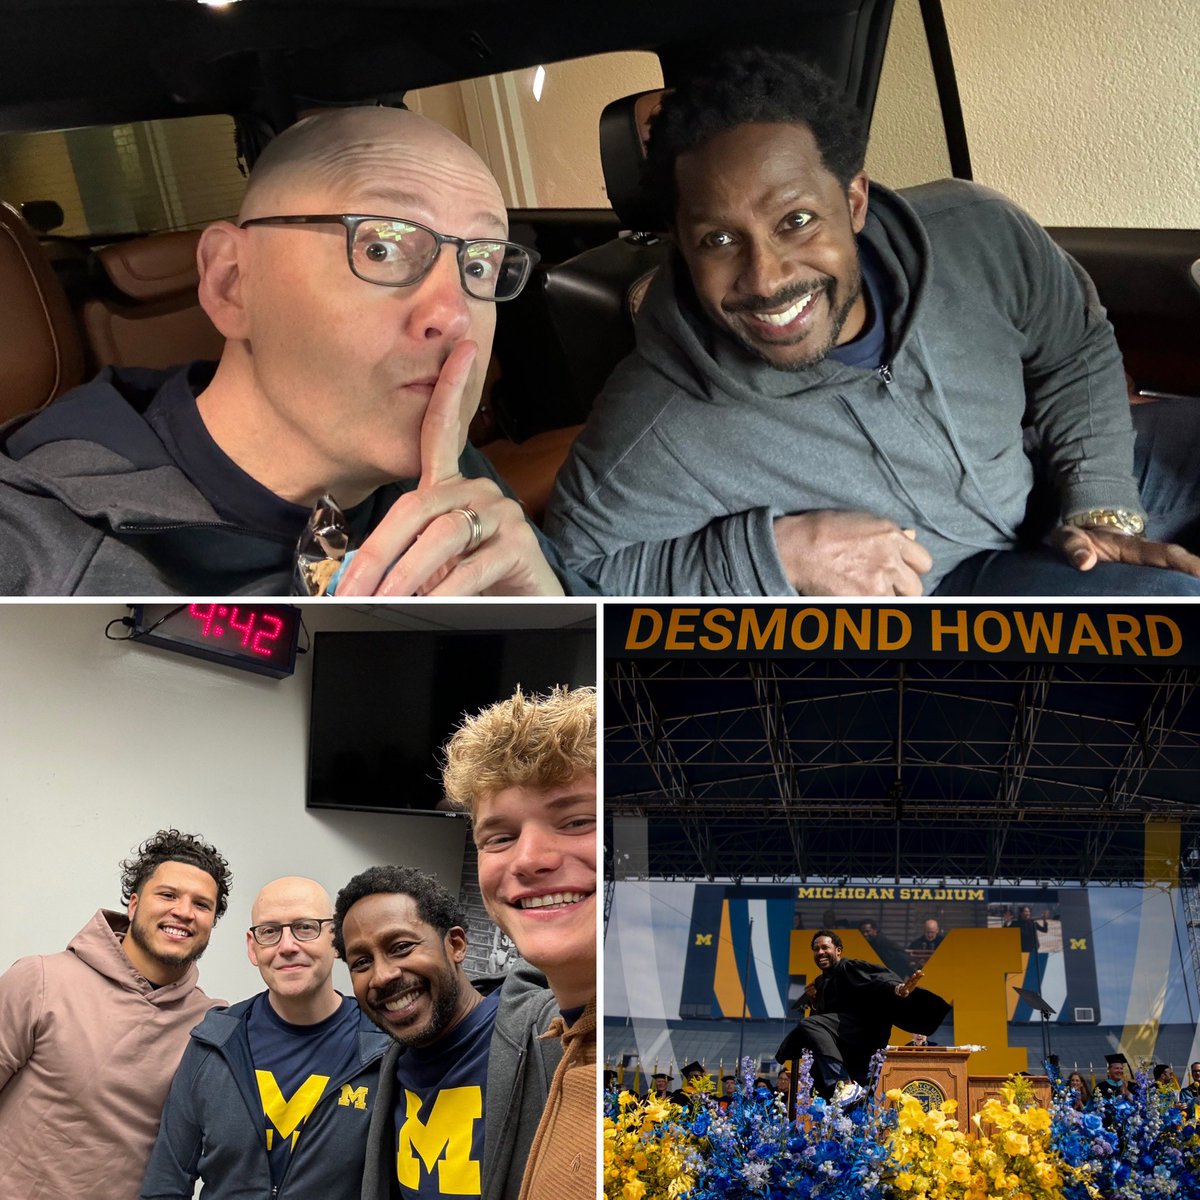 THREAD FOR DESMOND HOWARD Let me tell you a story about this man, the great @DesmondHoward. I pitched him my idea for the “magic trick” at the end of my speech back in December. A day later, he told me, “I’m in.” No fear. Full commitment to the bit.